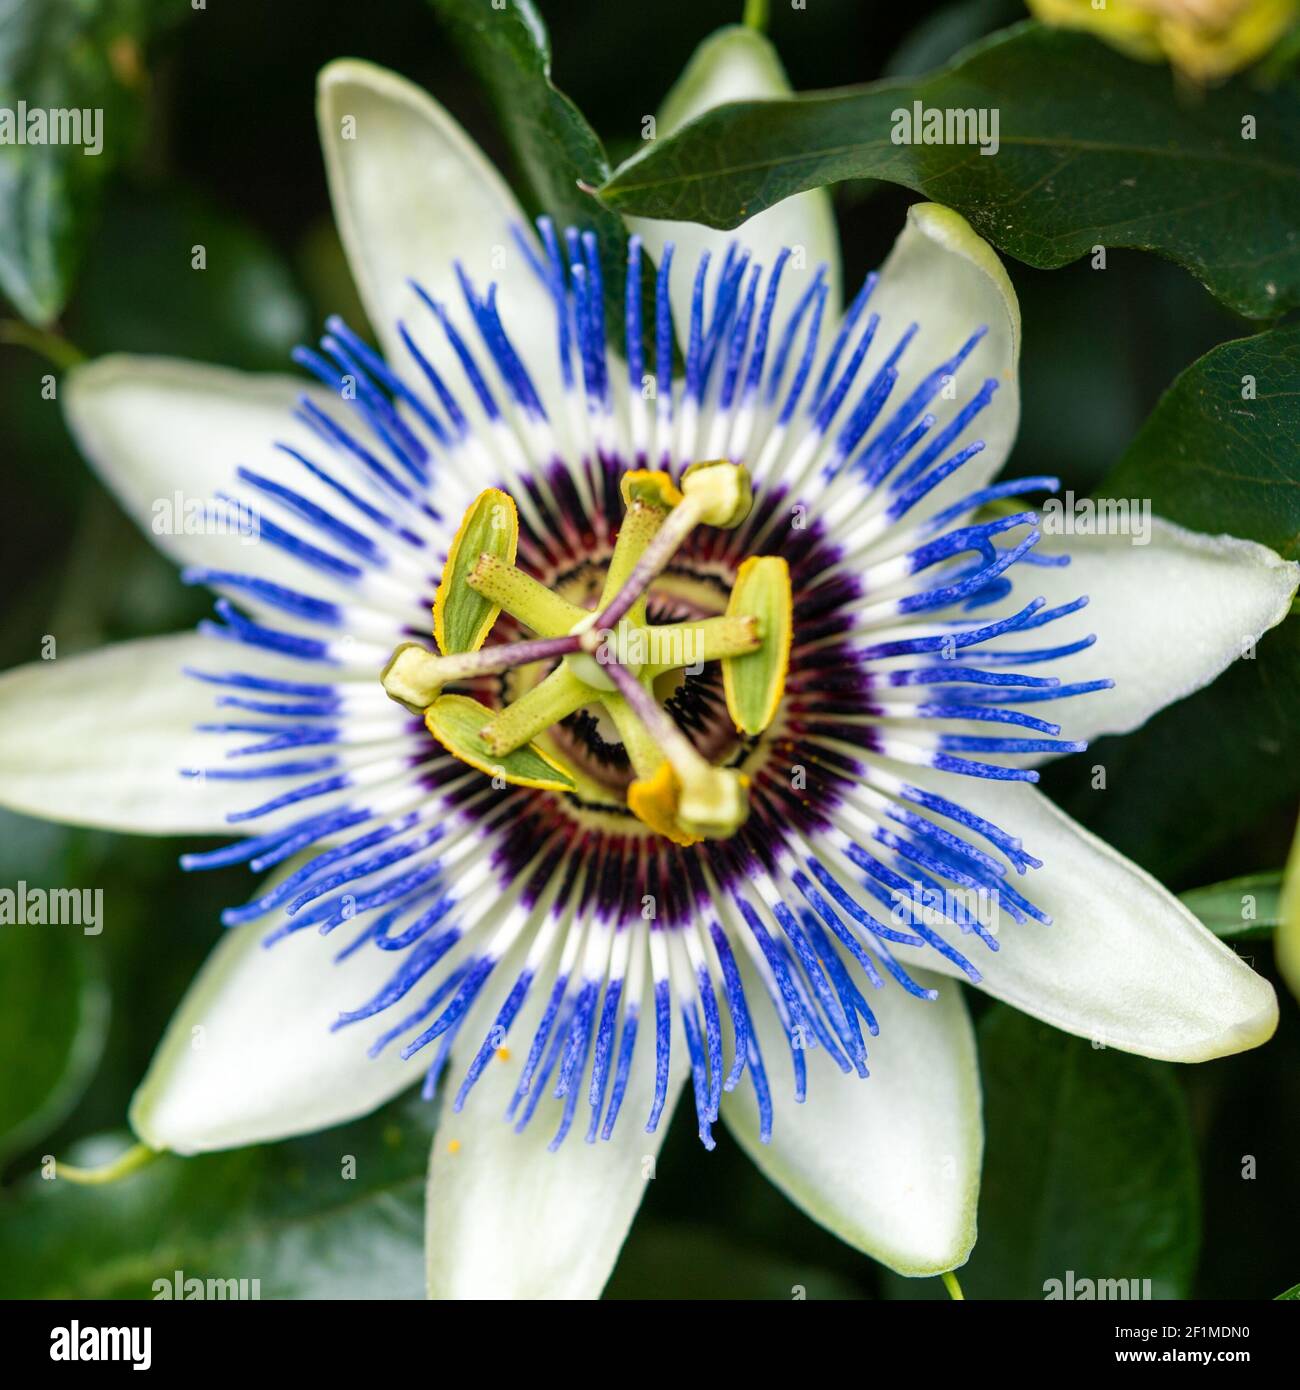 Macro photograph of a passion flower blossom and vine Stock Photo